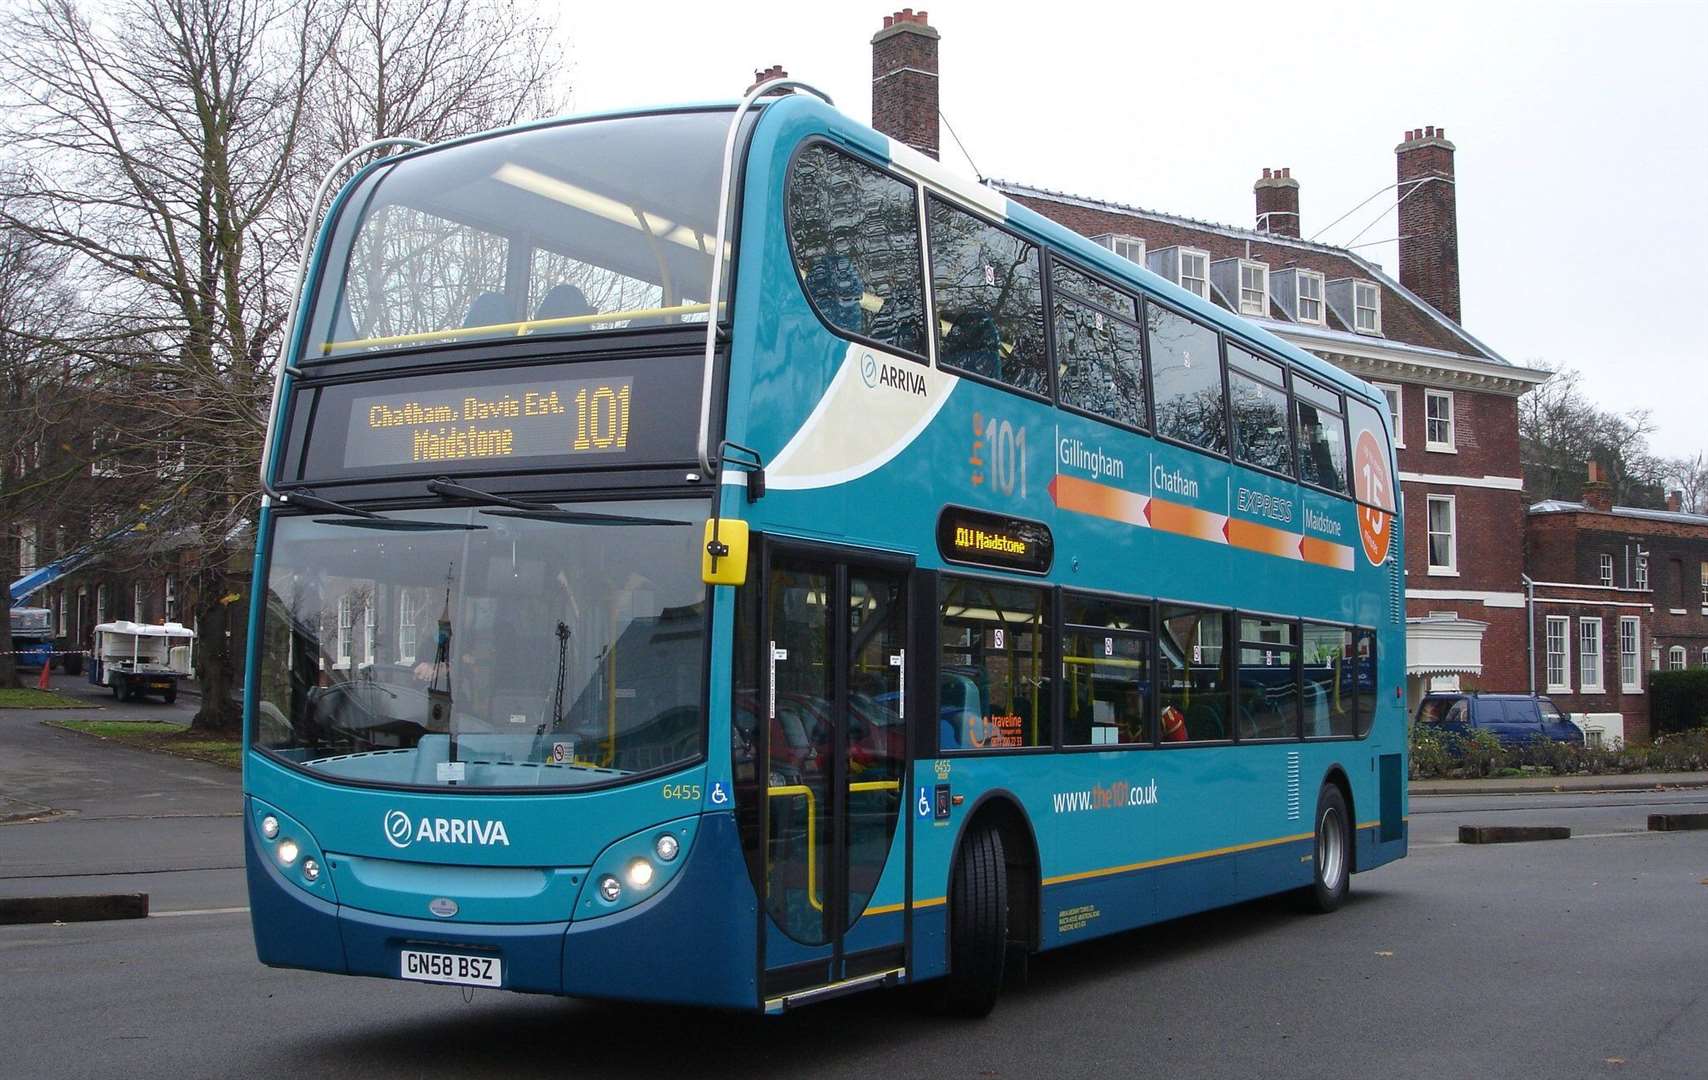 Stock image of an Arriva bus